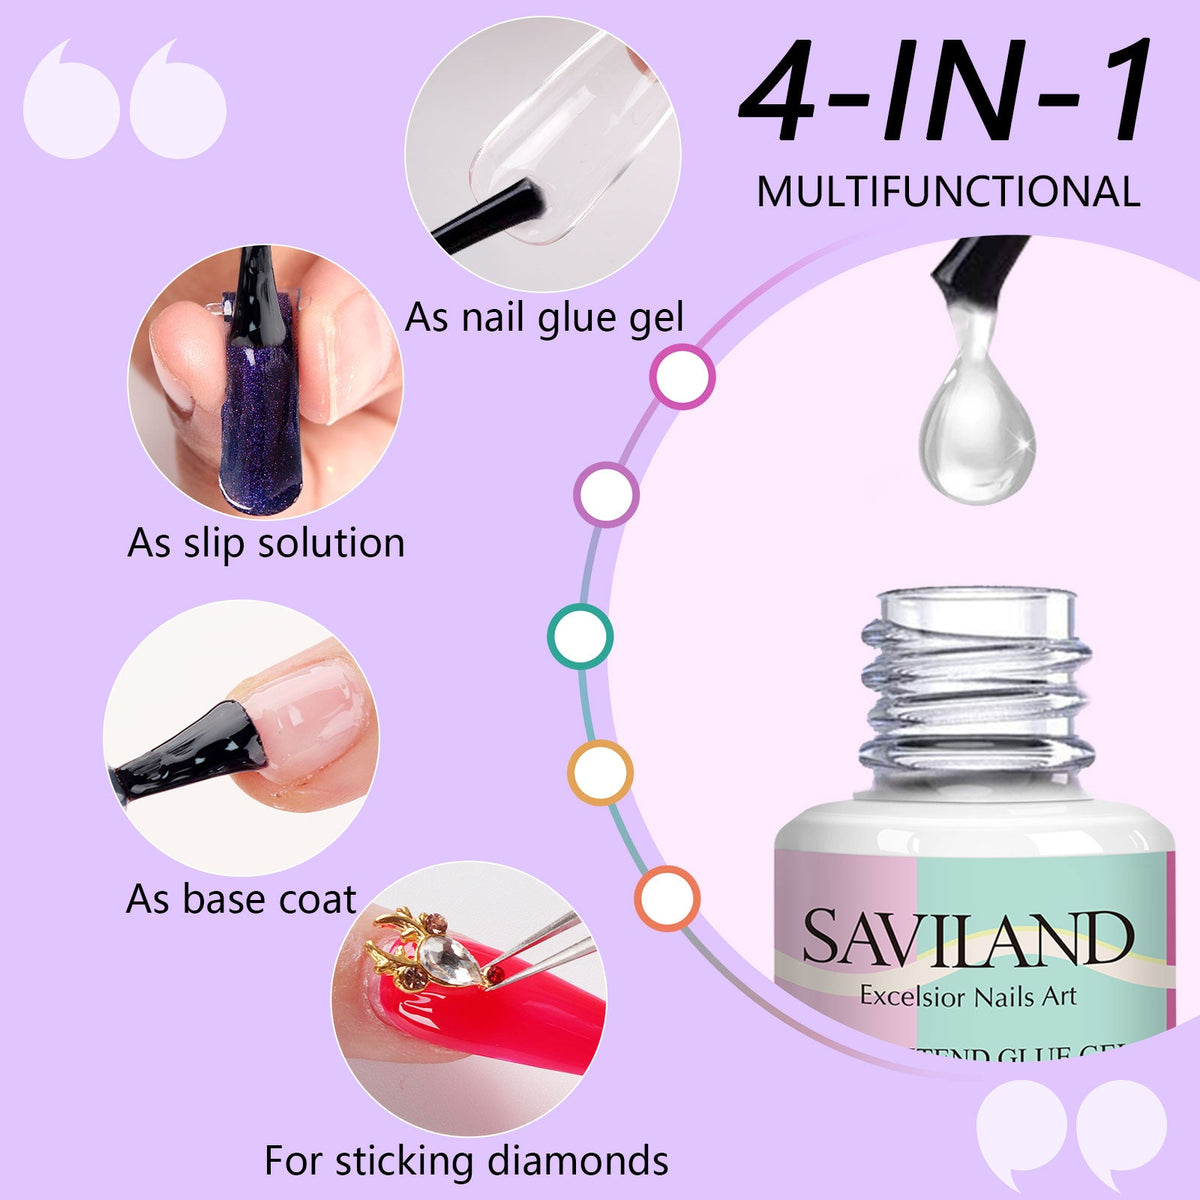 How to Use the Multipurpose Solid Nail Glue Gel 